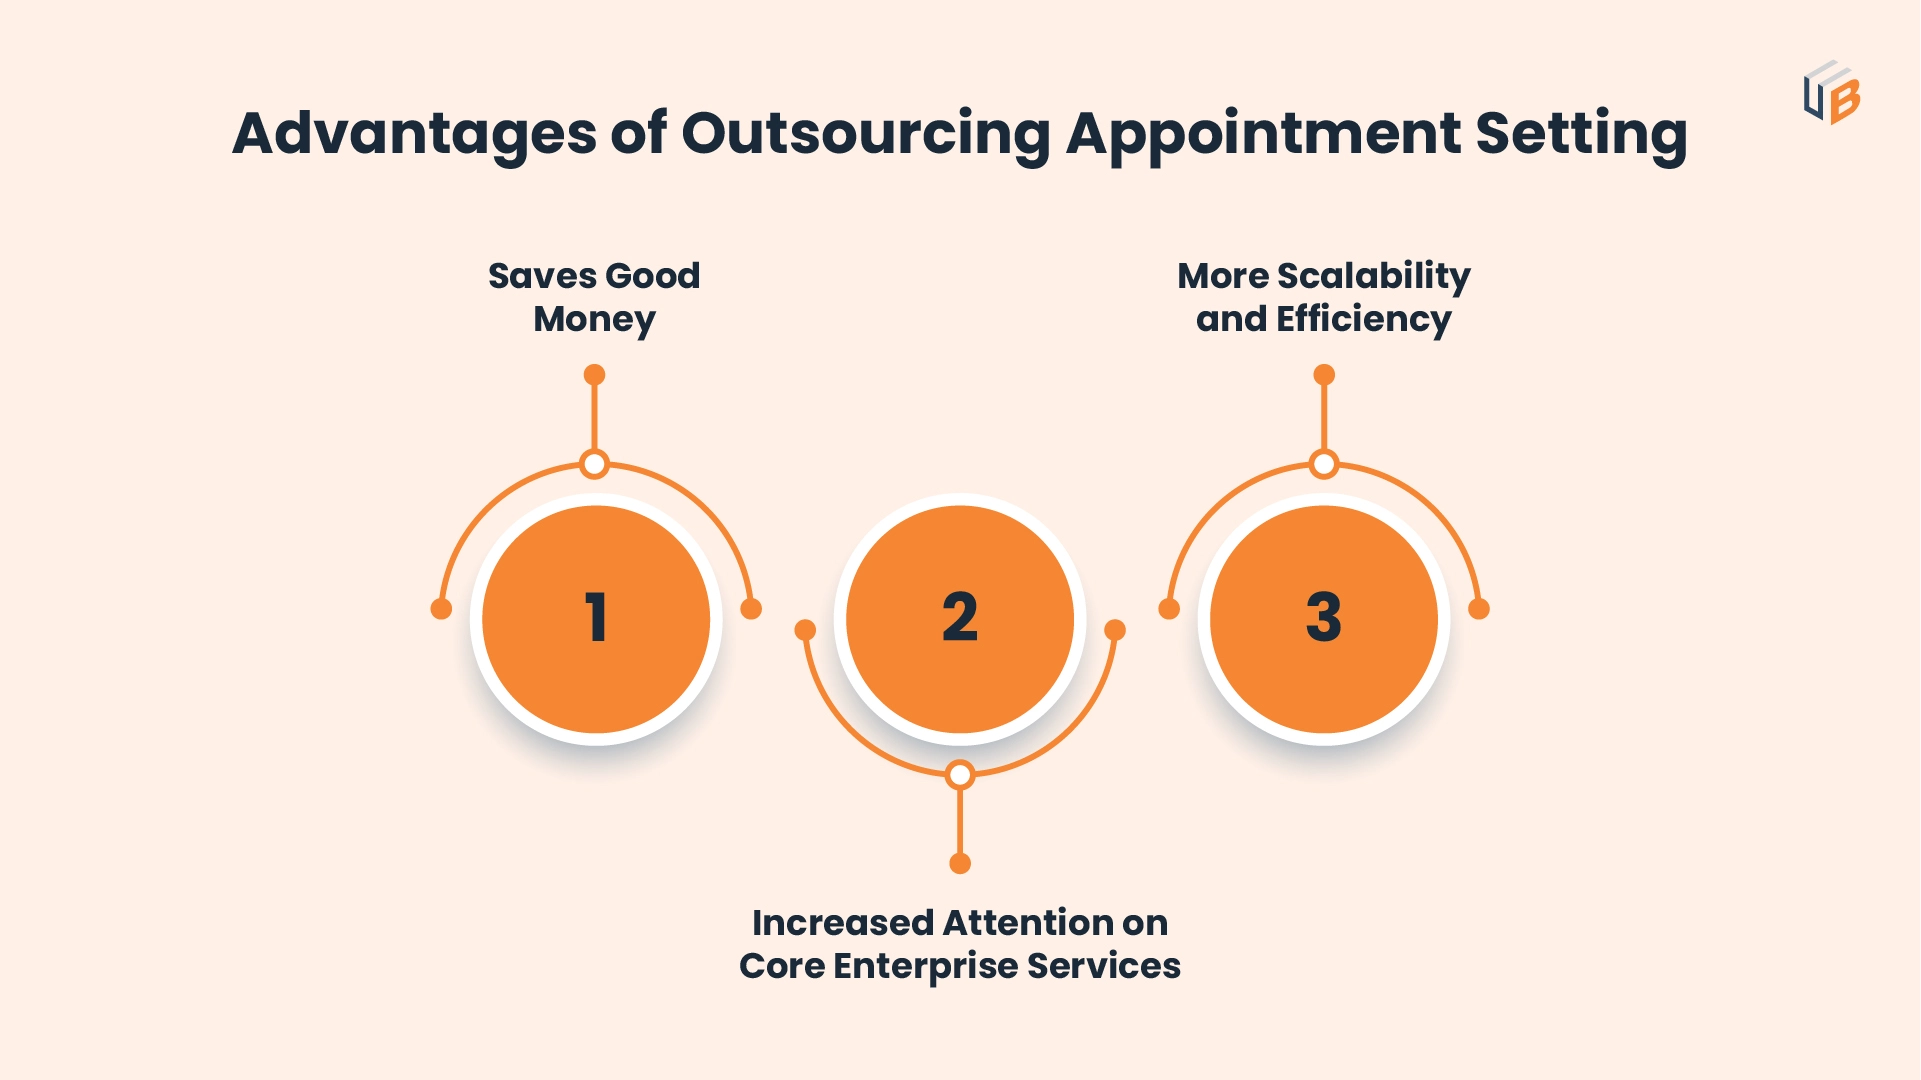 Advantages of Outsourcing Appointment Setting